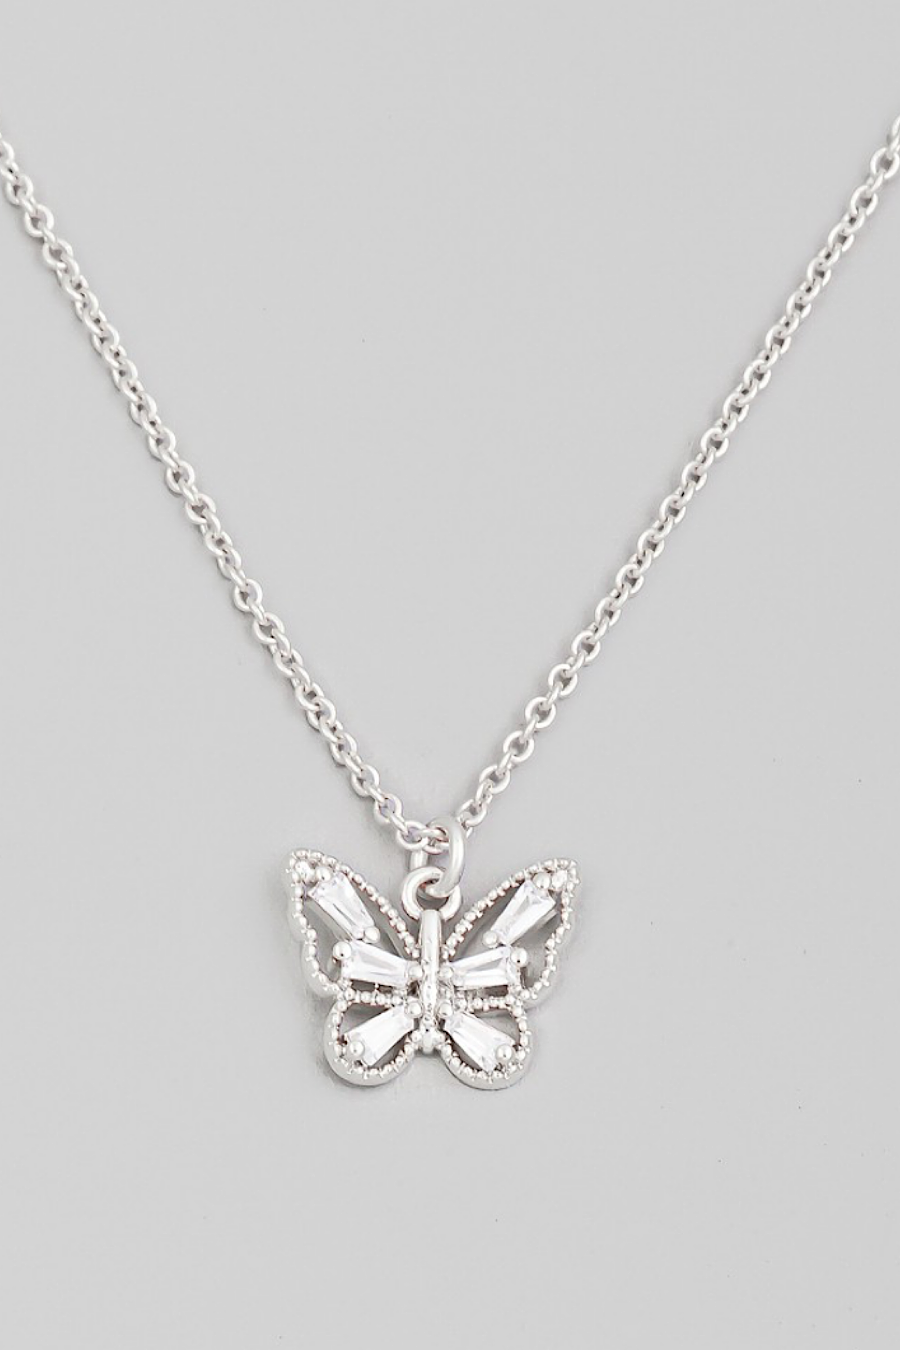 Clear Rhinestone Butterfly Pendant Necklace Silver | Konga Online Shopping